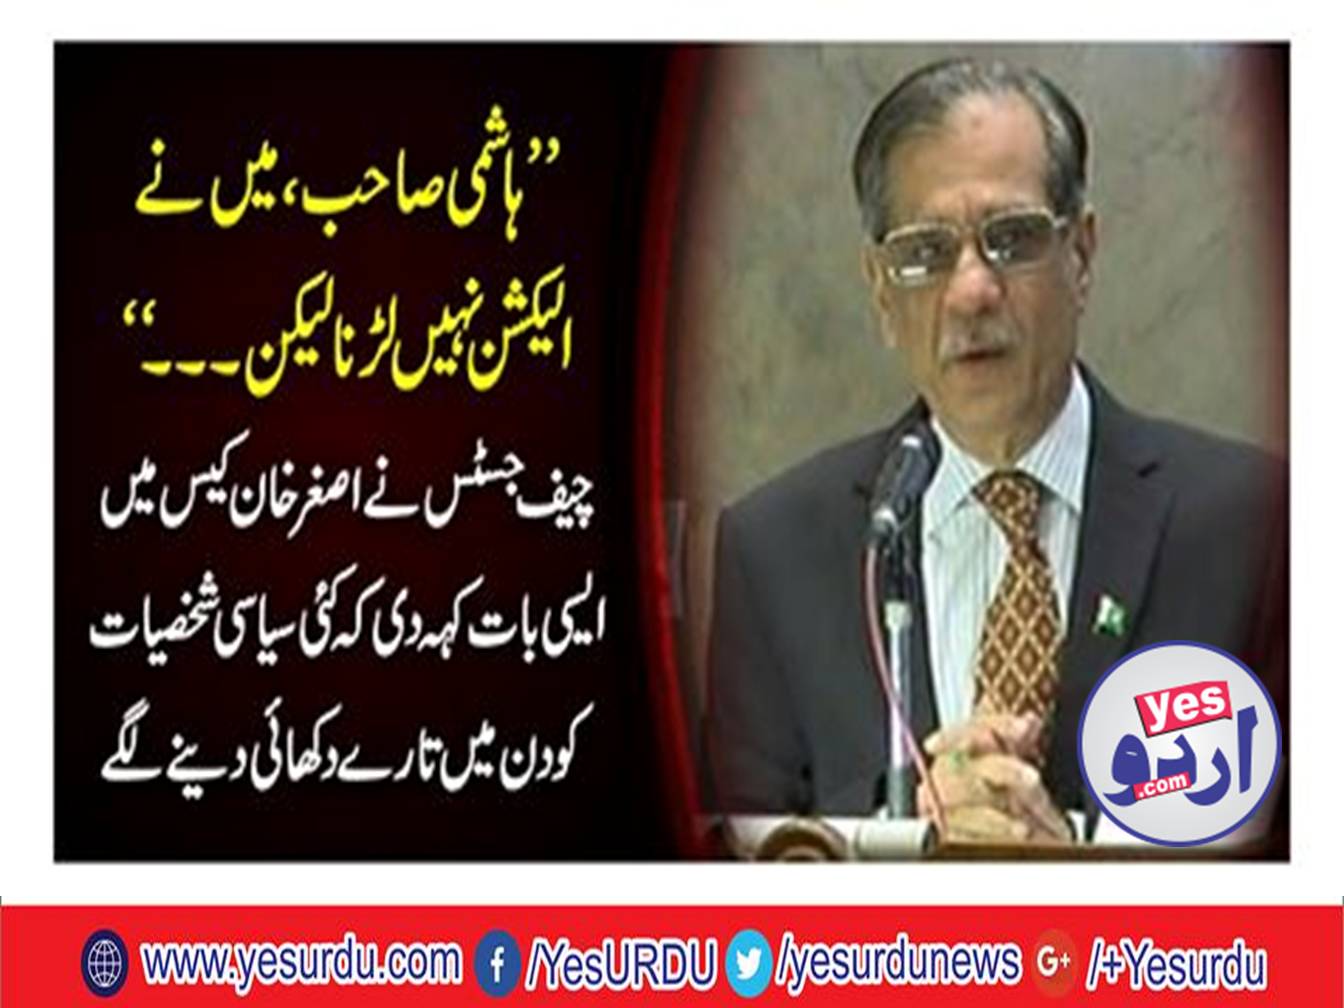 Hashmi Sir! I do not contest election, to protect the constitution; Chief Justice remarks in Asghar Khan case